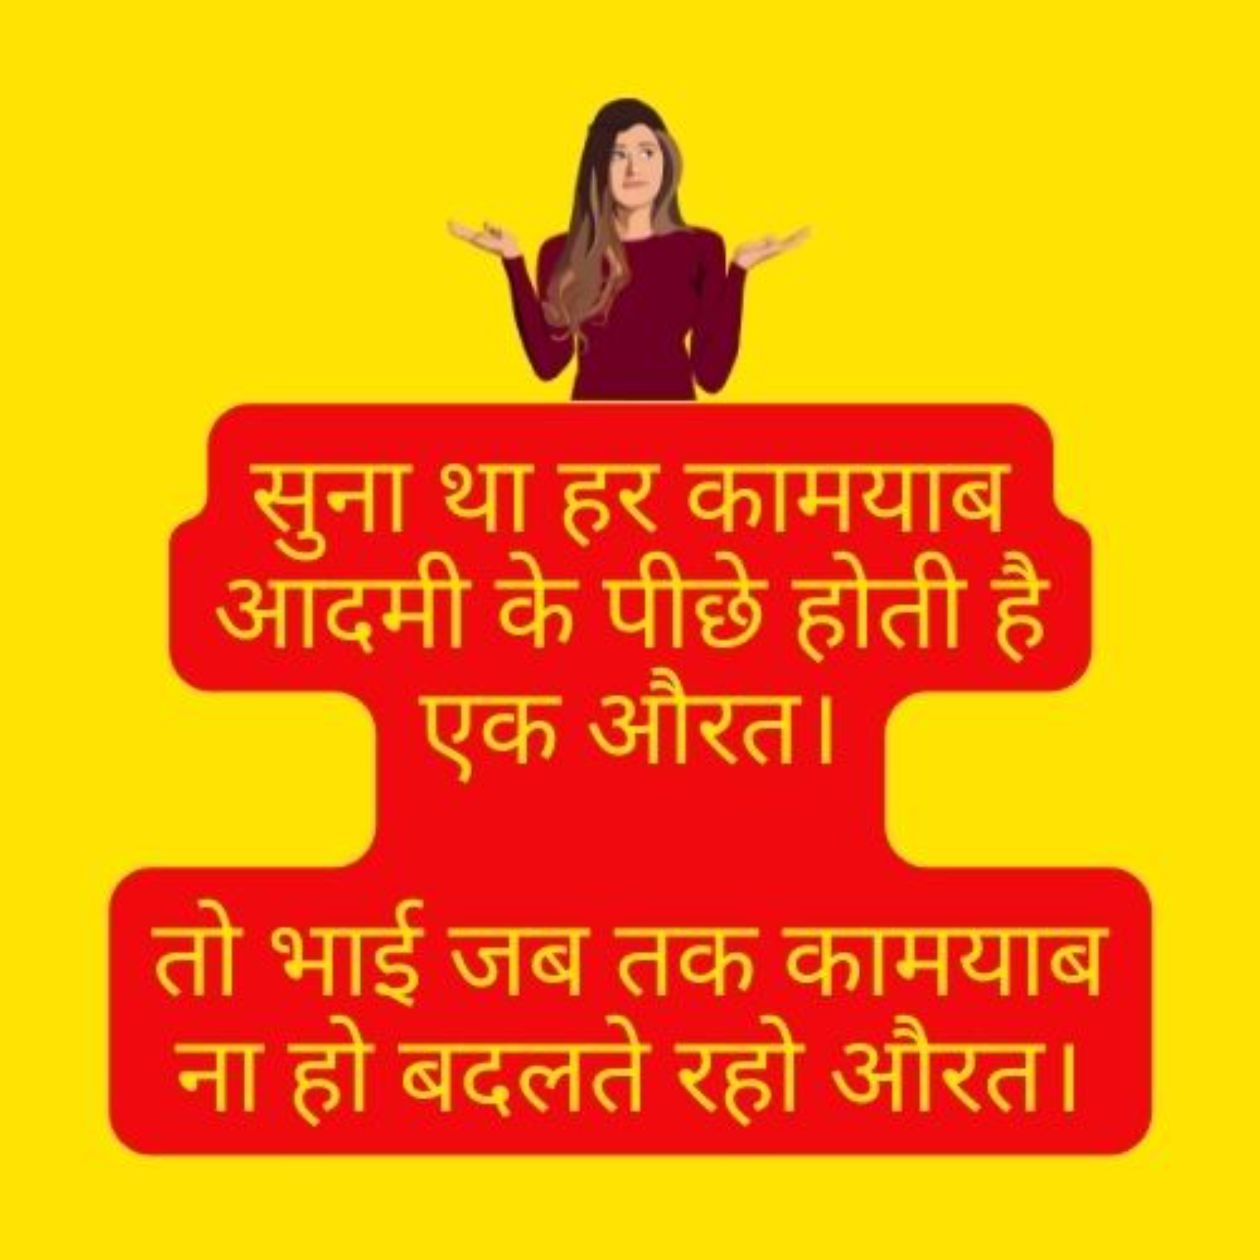 A woman animation and funny text in Hindi about a successful man.